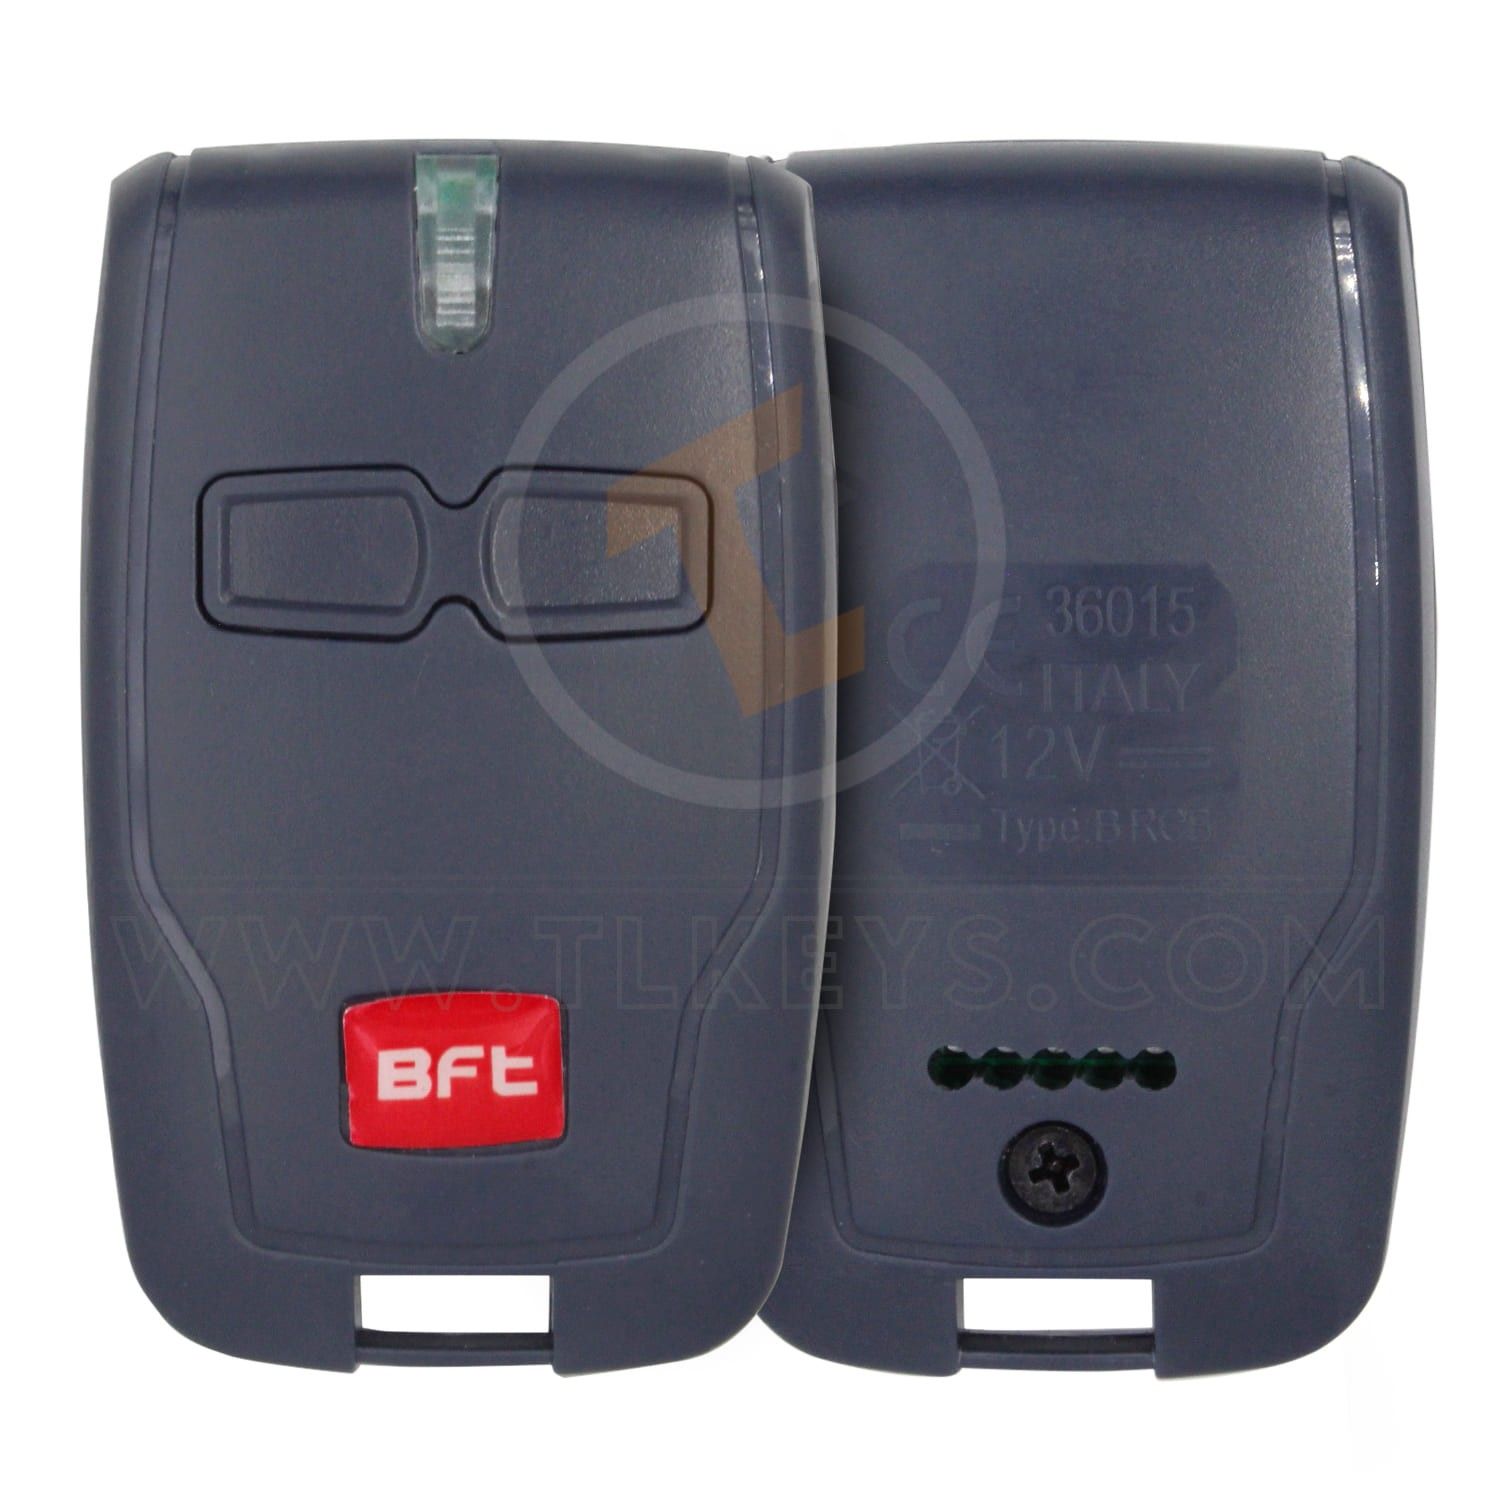 BFT Compatible Remote Control 2 Buttons B RCB Type garage gate remote